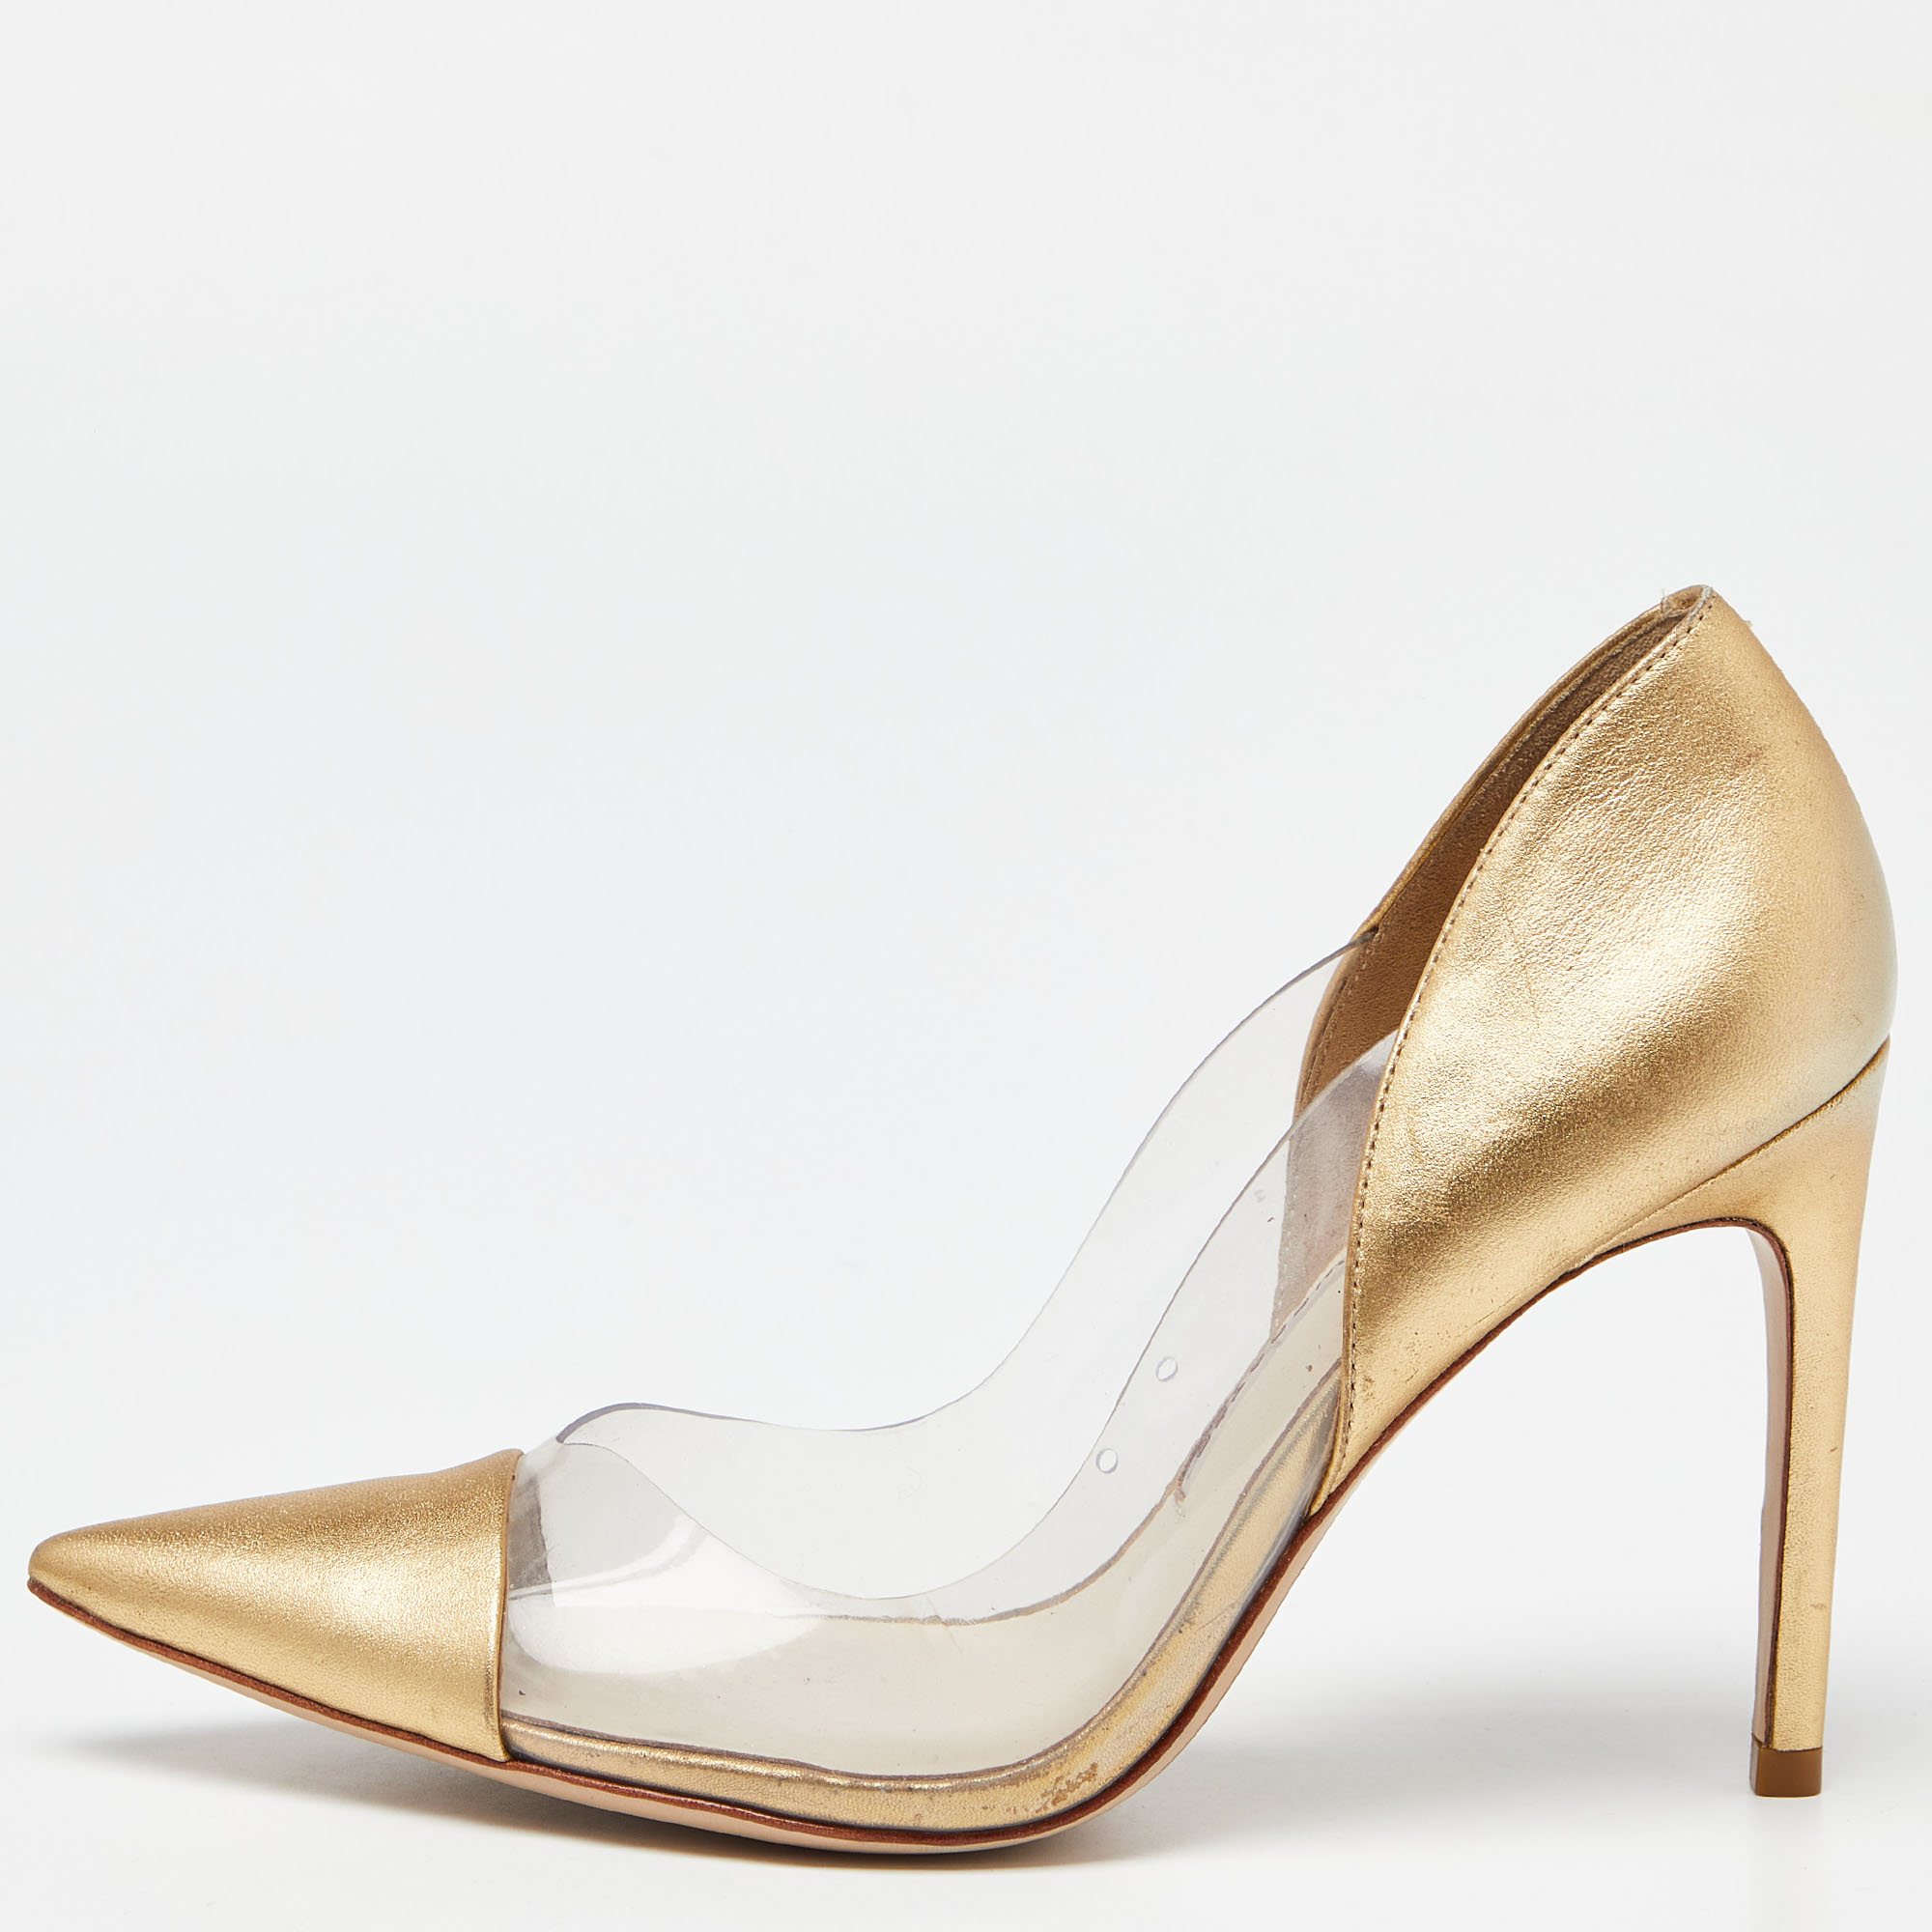 Sophia Webster Gold/Transparent Leather And PVC Pointed Toe Pumps Size 38.5